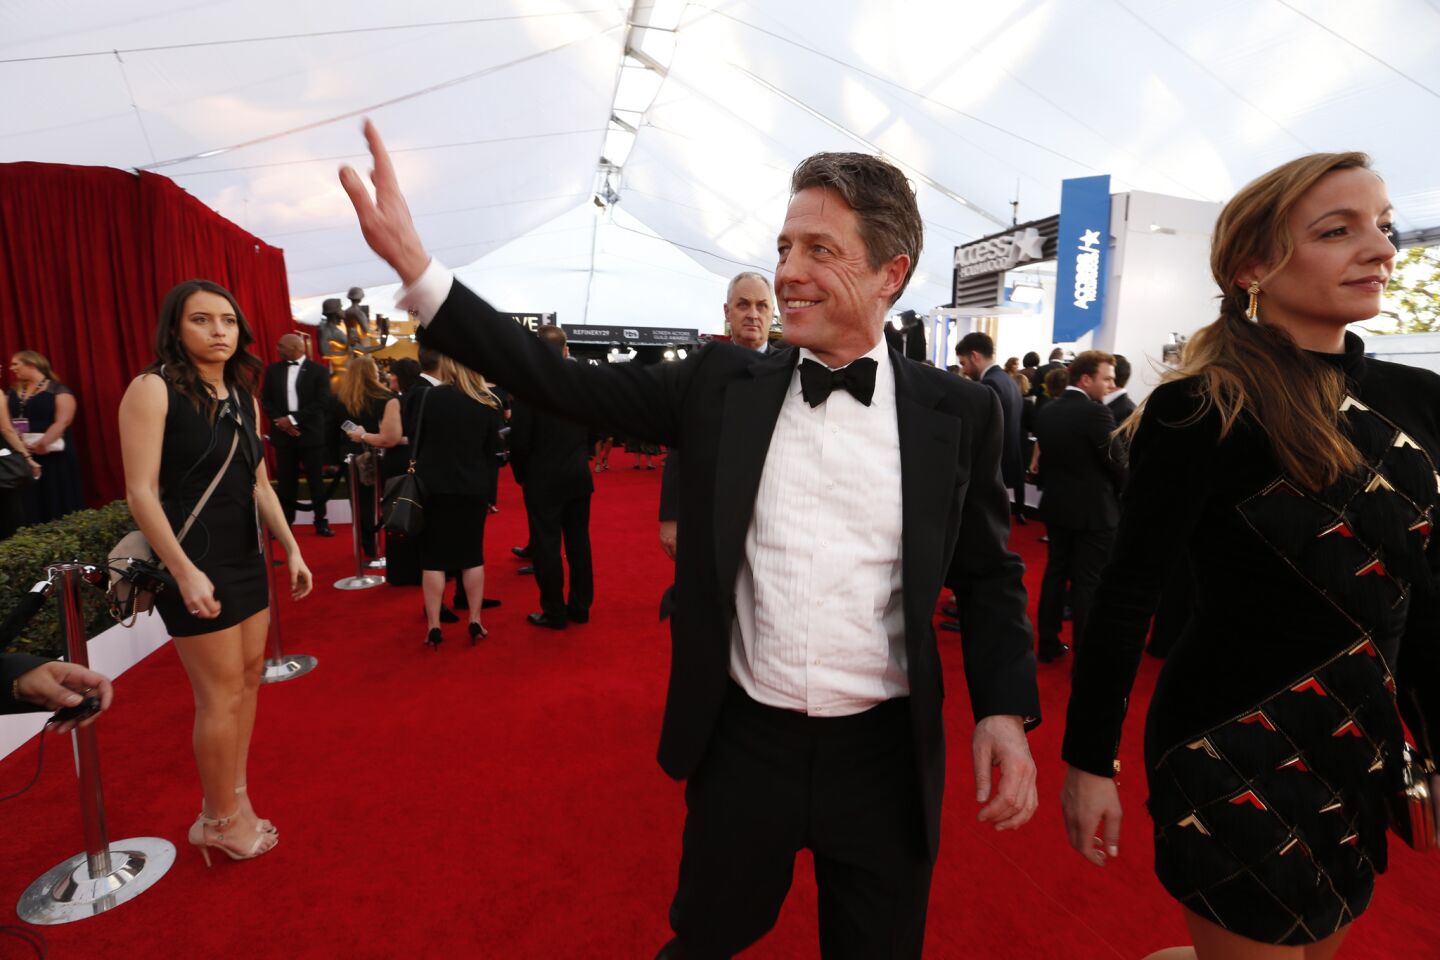 Hugh Grant is nominated for "Florence Foster Jenkins."